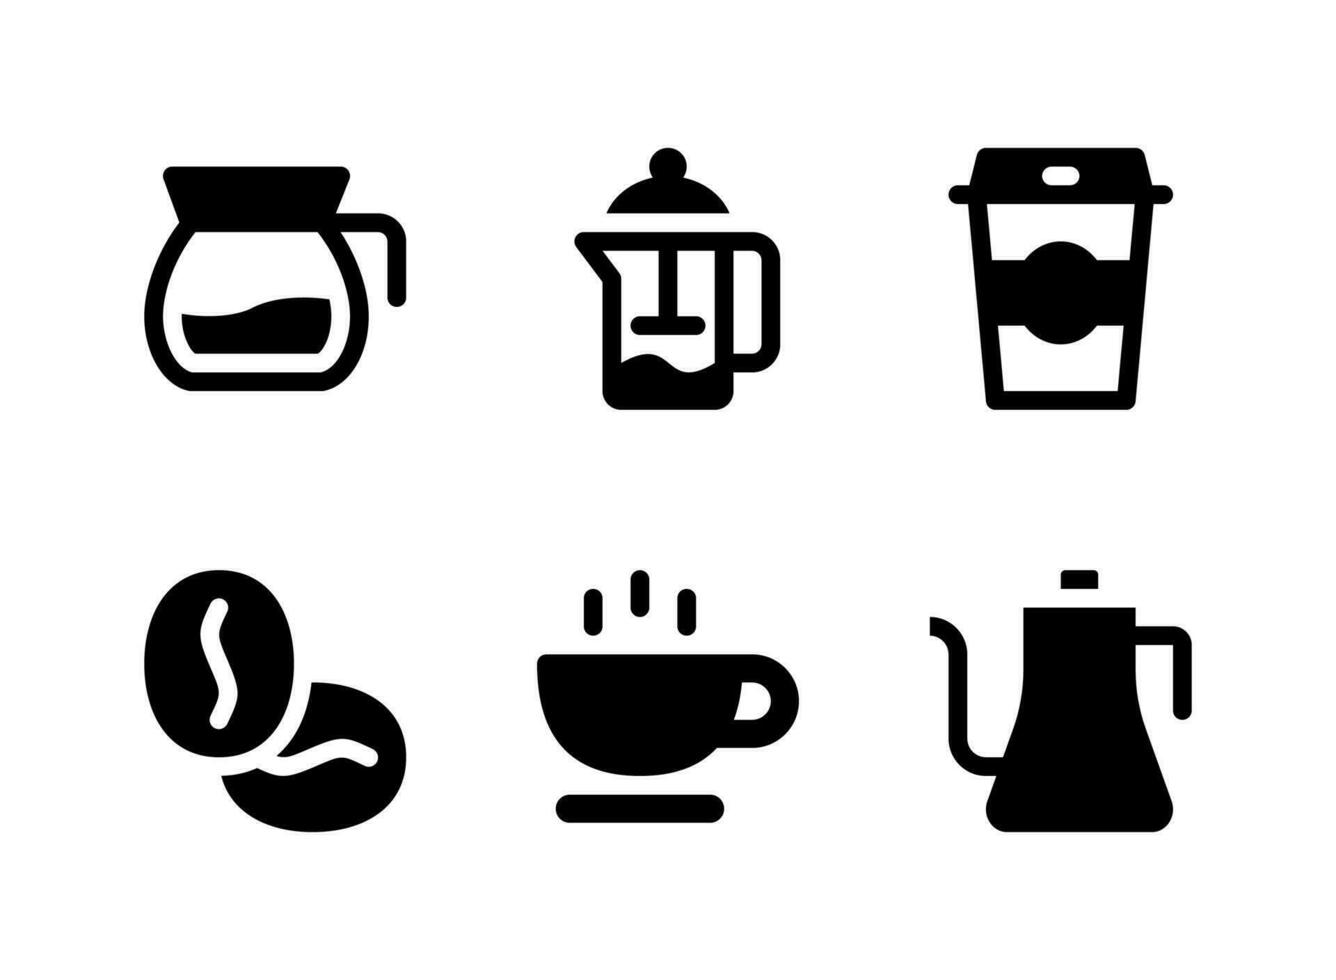 Simple Set of Coffee Shop Related Vector Solid Icons. Contains Icons as Jug, Cup, Coffee Beans, Kettle and more.